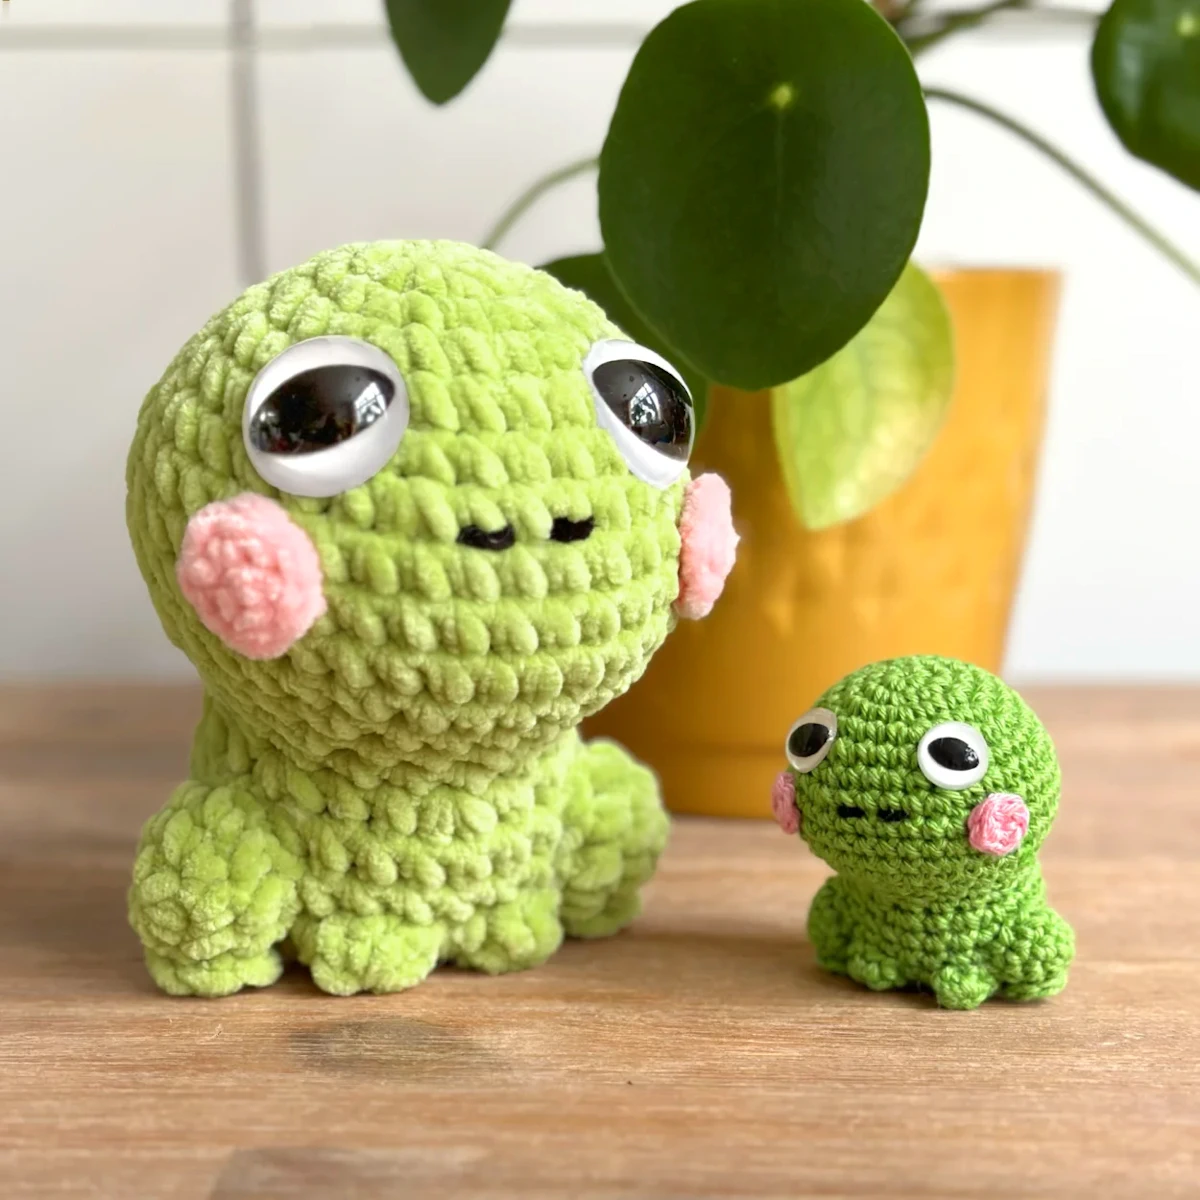 Two crocheted frog toys - large and small.